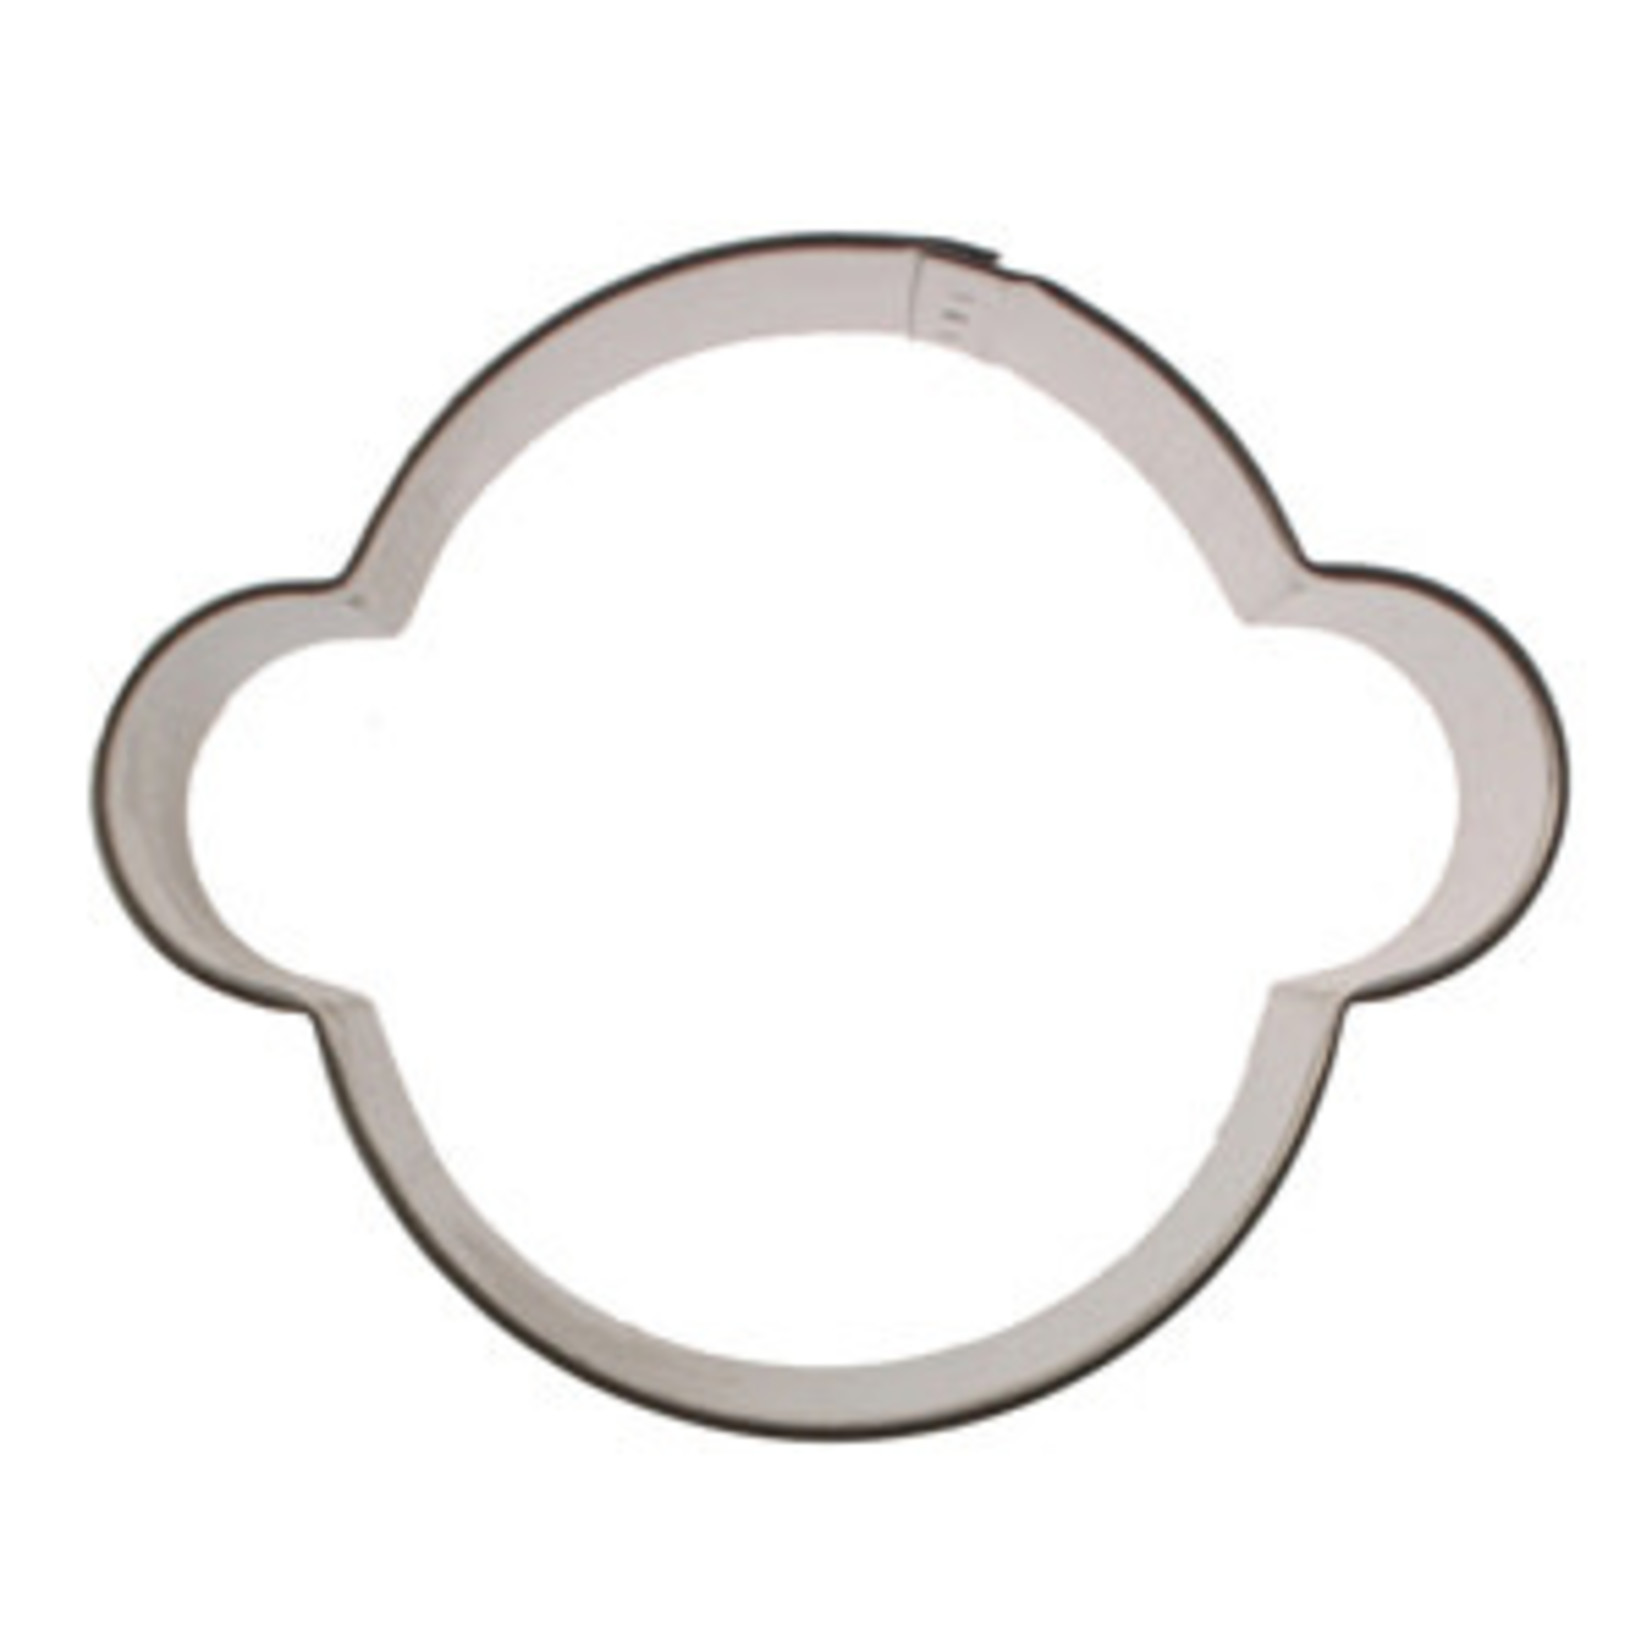 TWS 3.25" Monkey Face Cookie Cutter